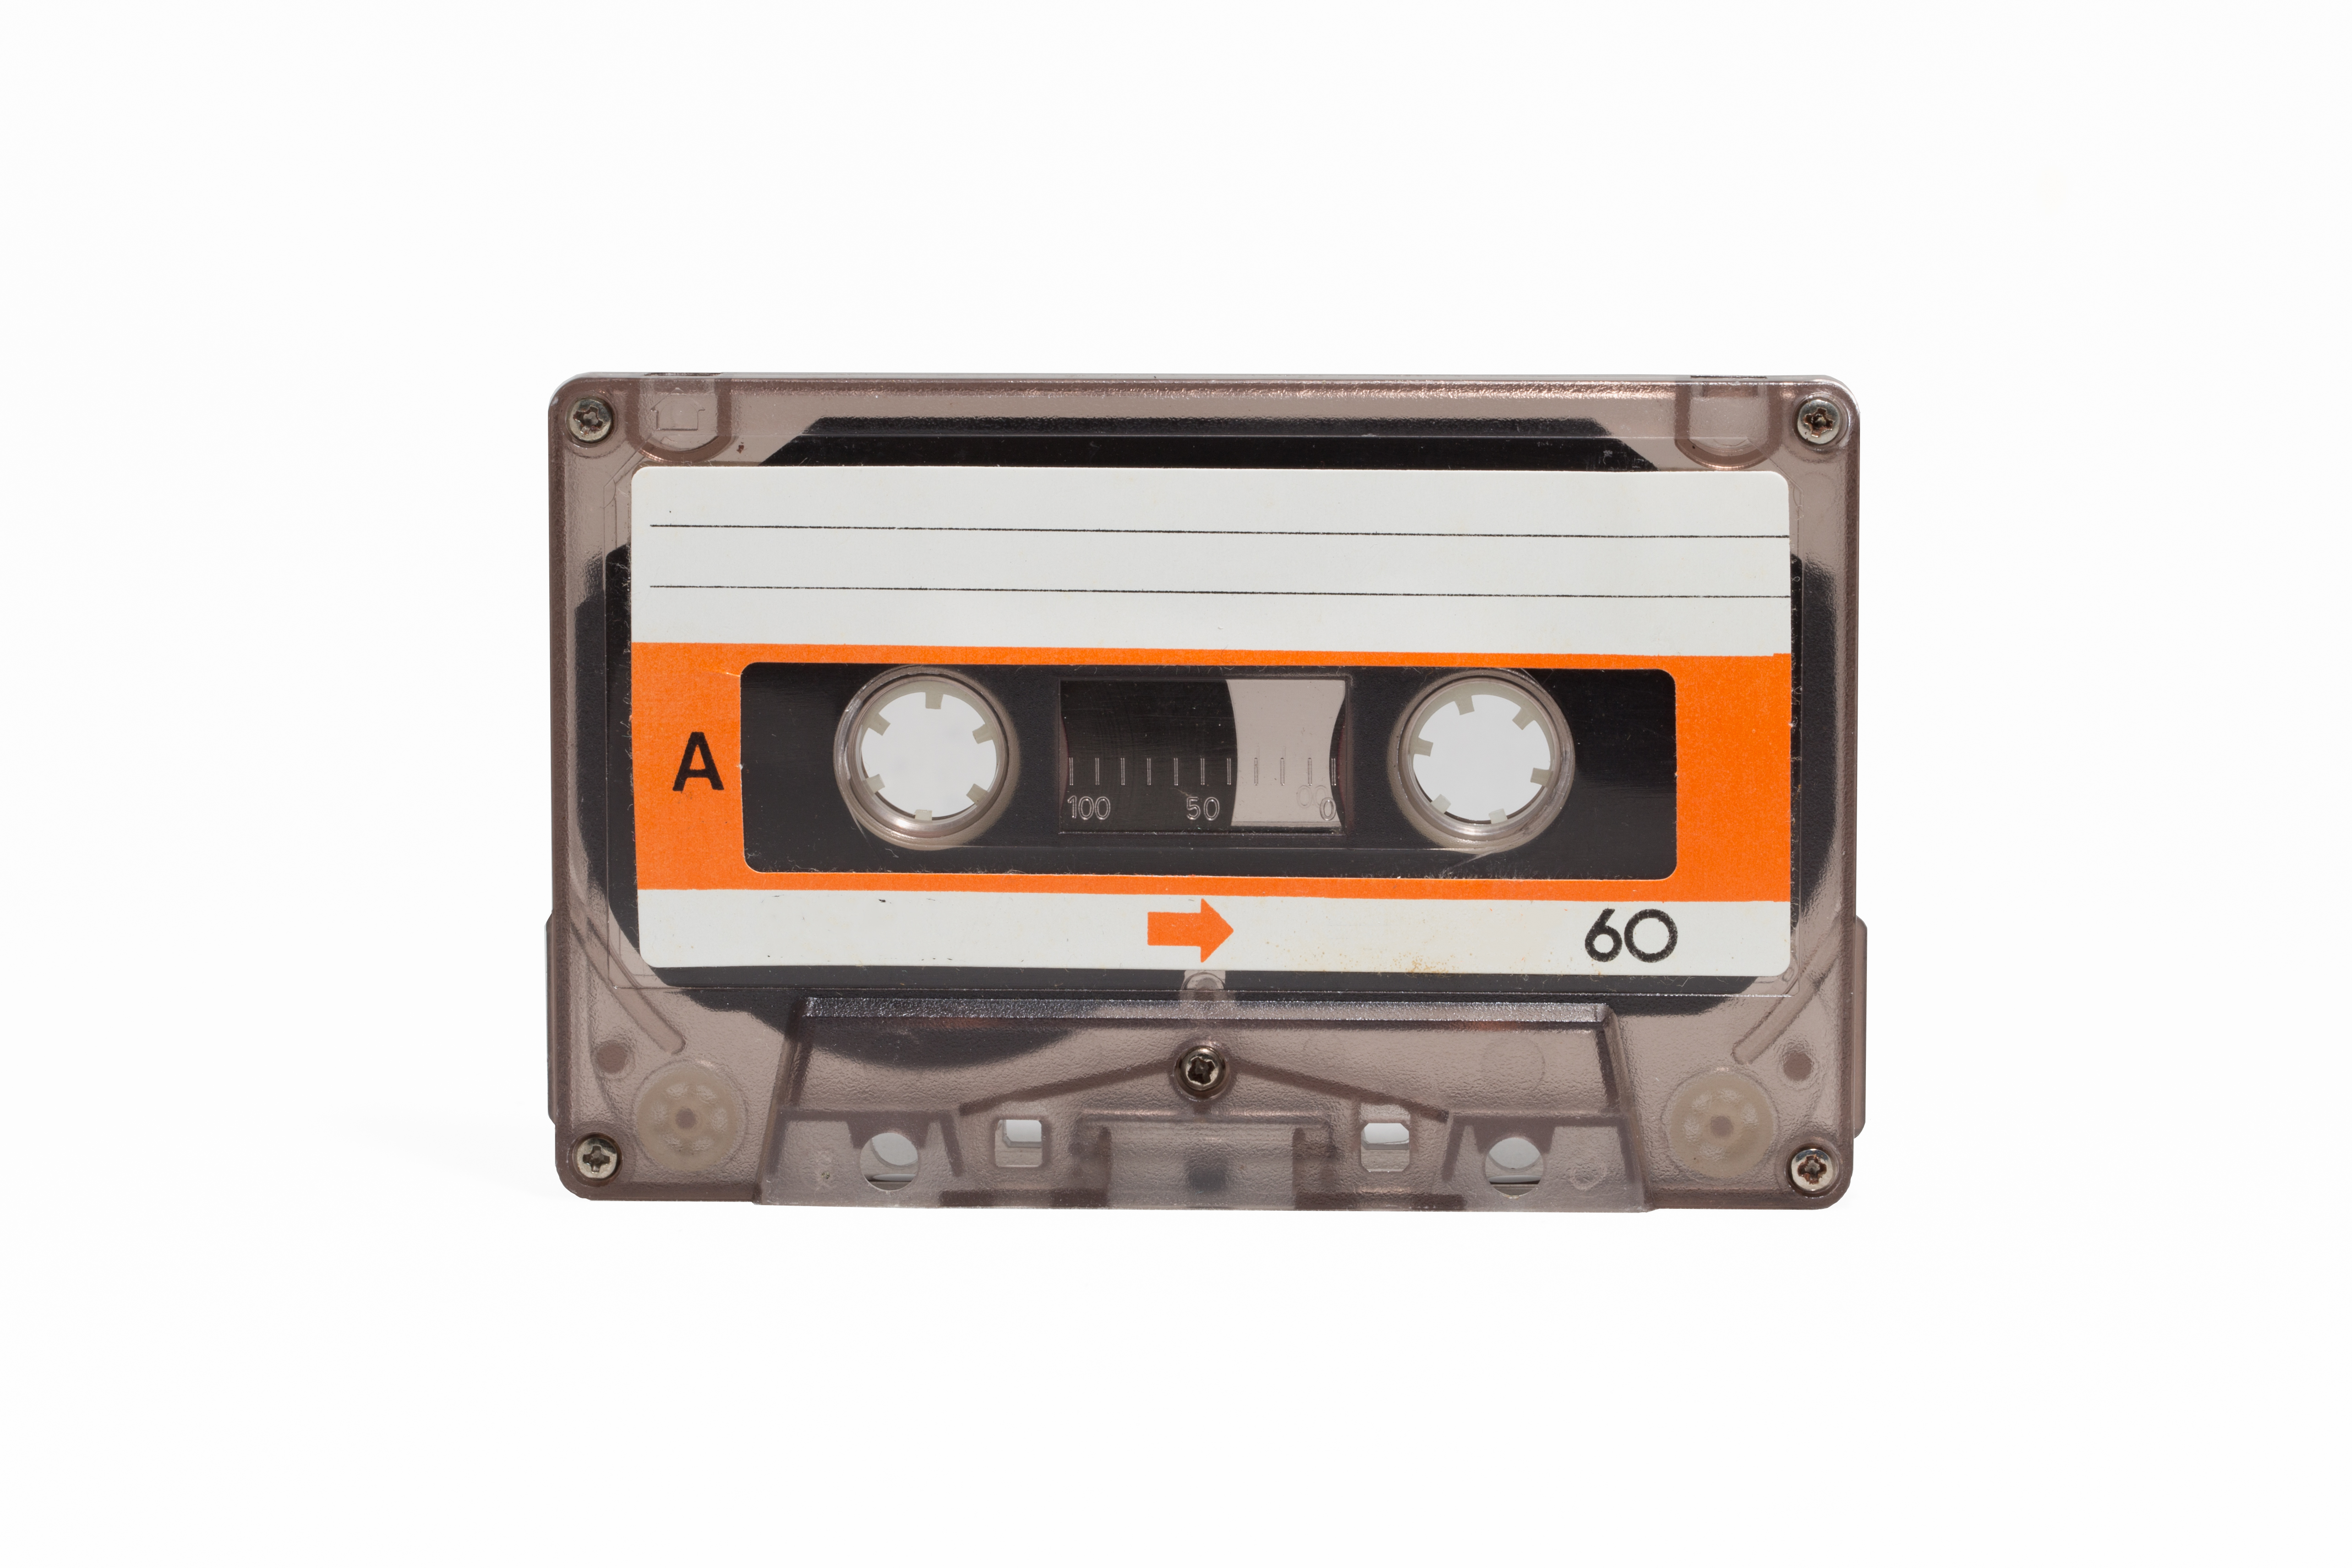 Are Cassette Tapes Really Making A Comeback? | 104.1 The Ranch
